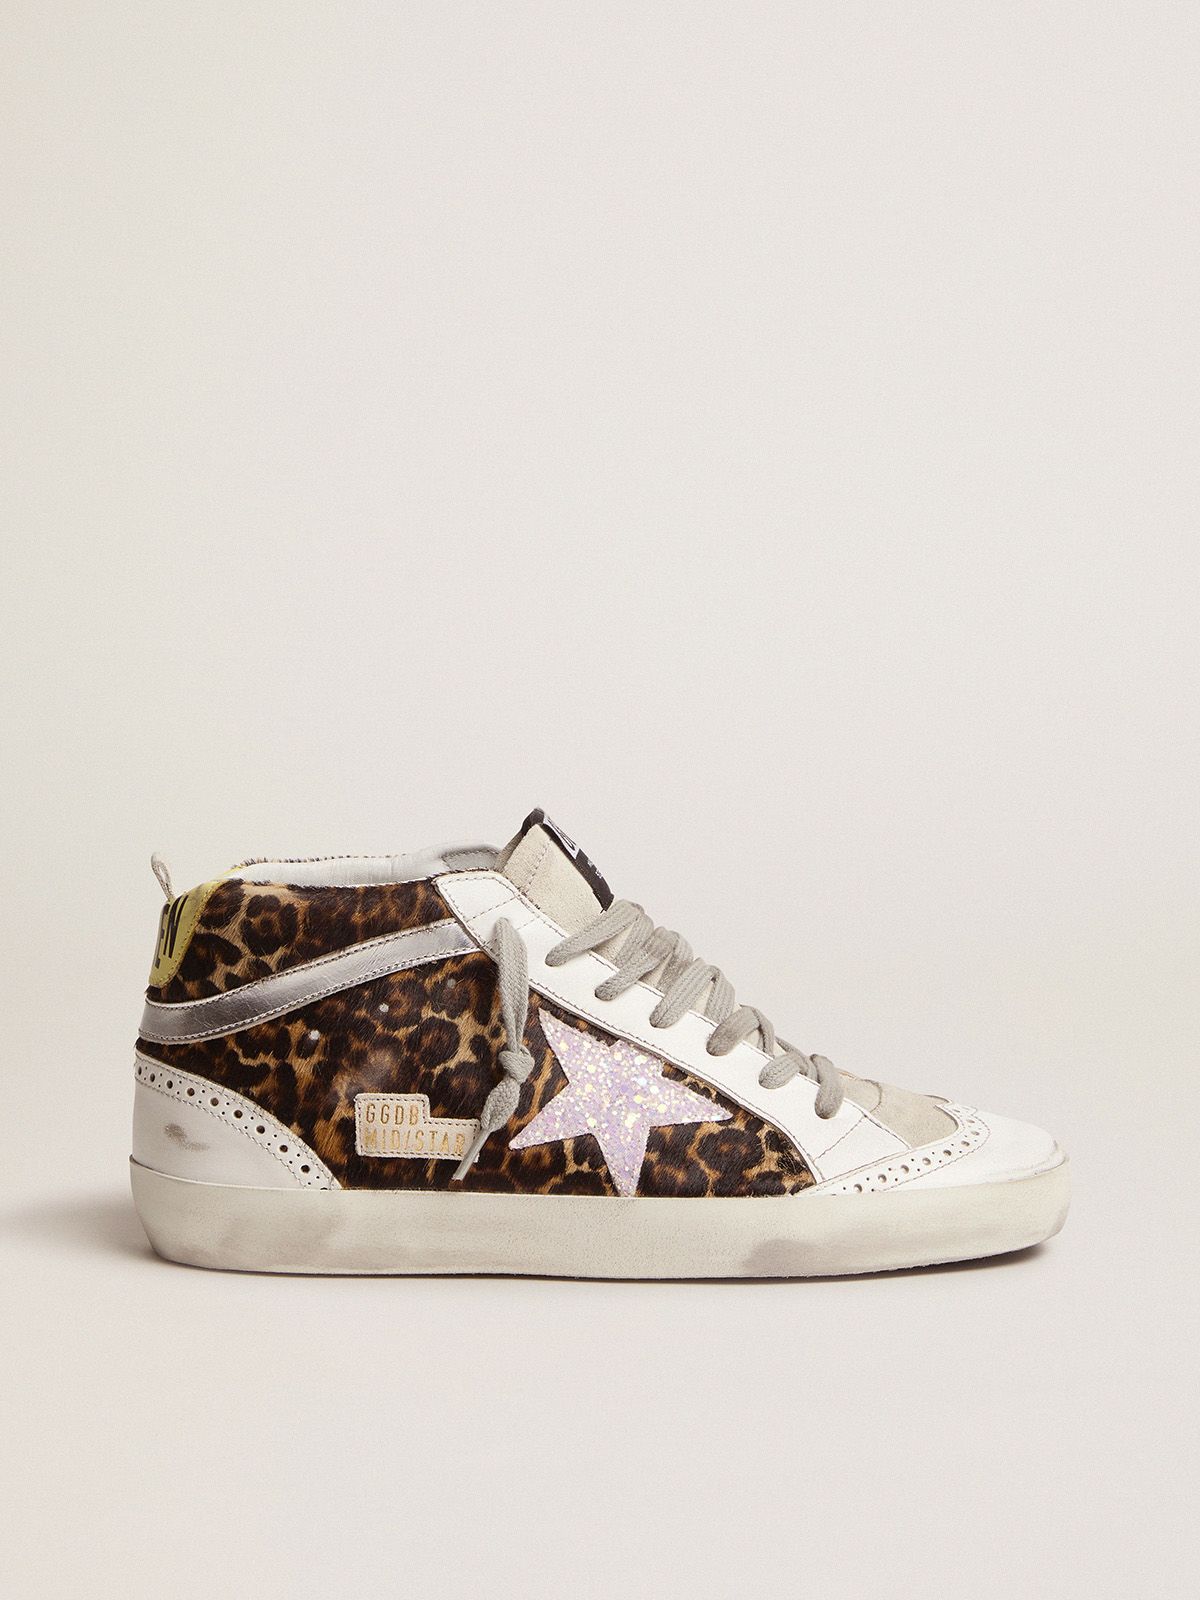 Mid-Star sneakers LTD in pony skin with glittery star | Golden Goose